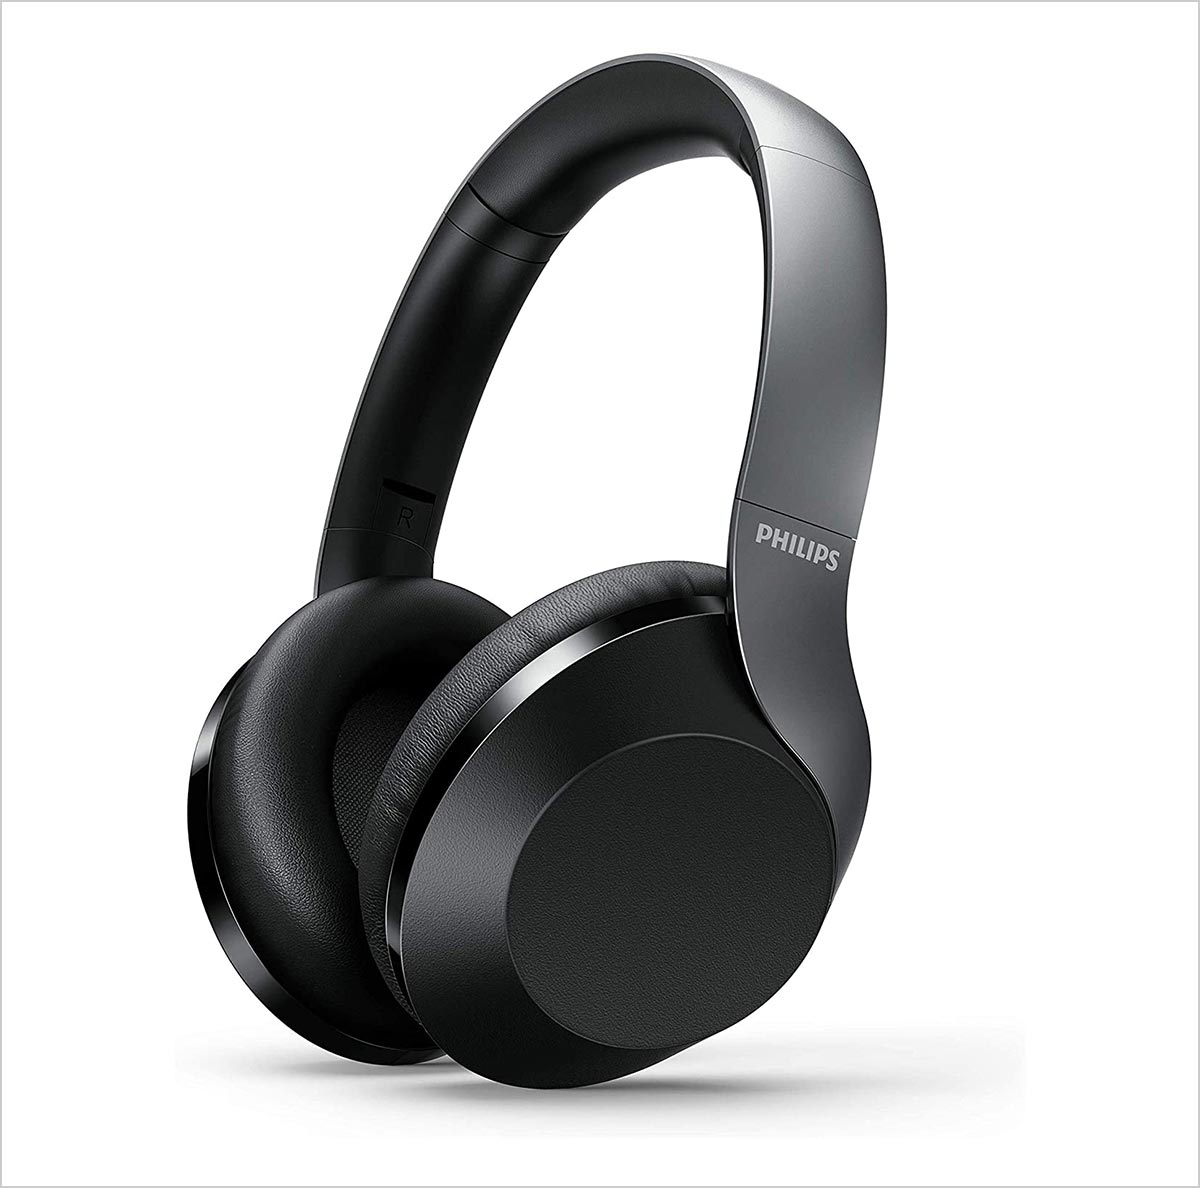 Philips-PH805-Active-Noise-Canceling-(ANC)